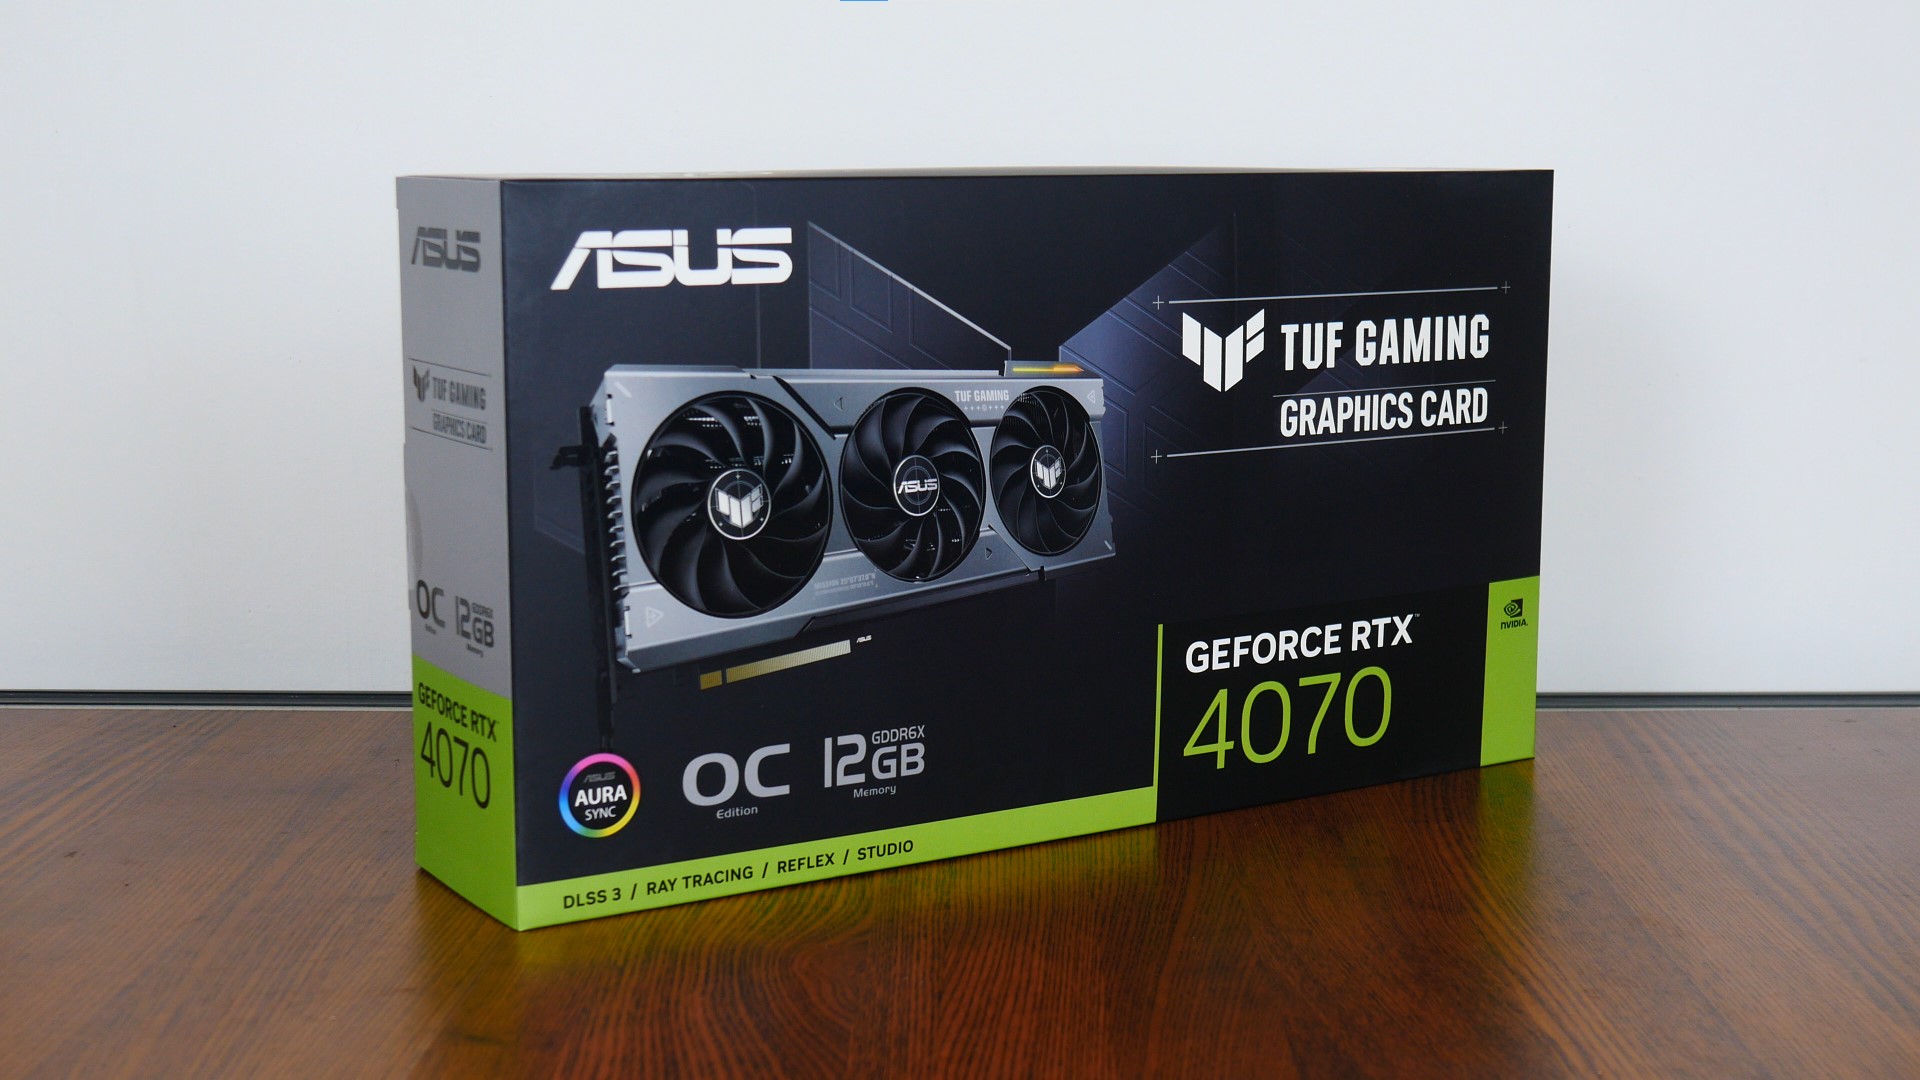 ASUS TUF Gaming GeForce RTX 4070 12GB GDDR6X OC Edition Packaging (Front)